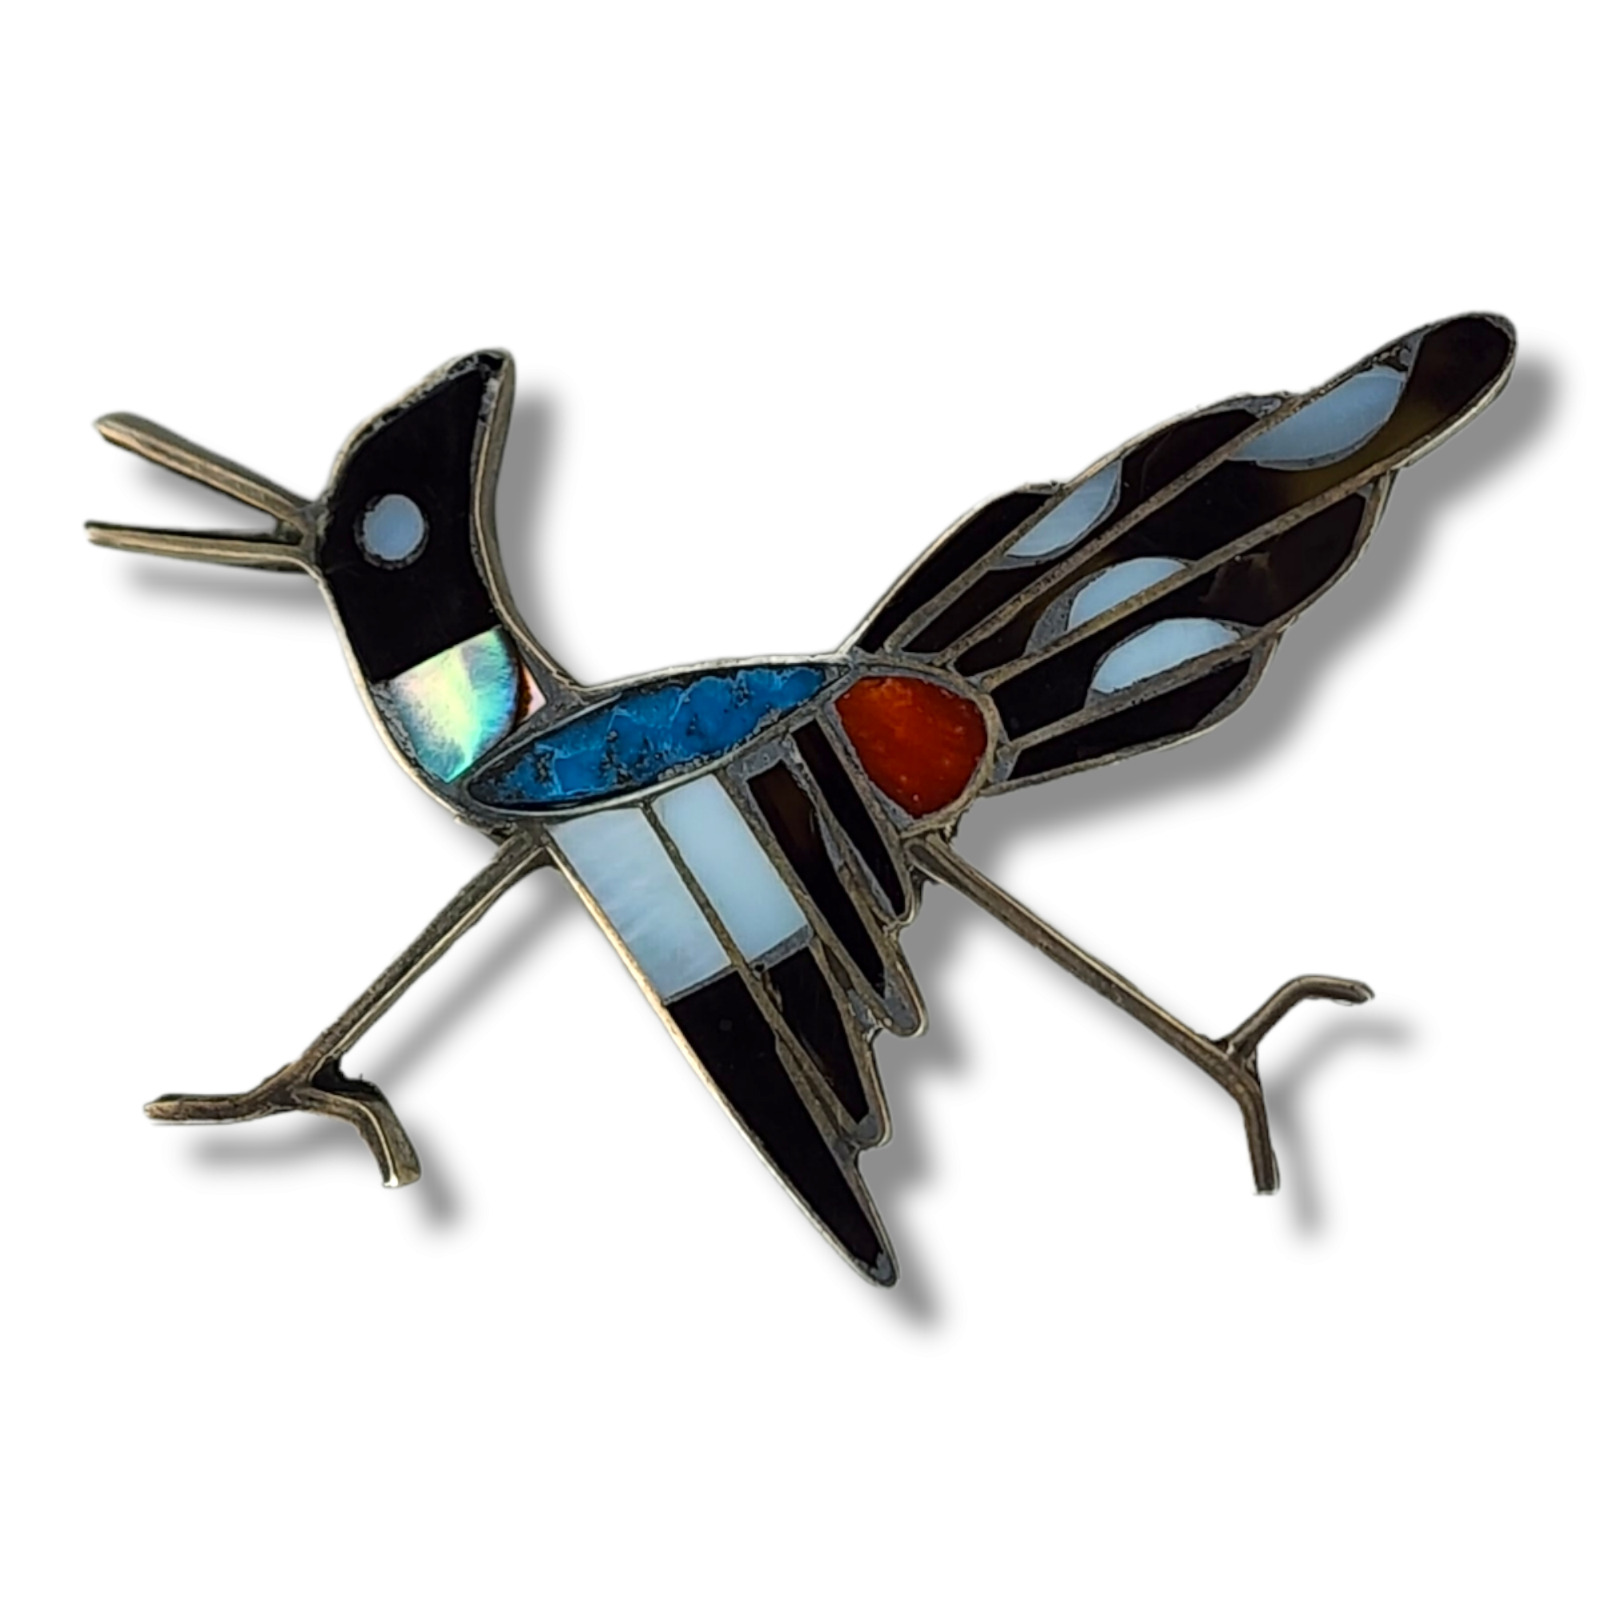 Vintage Zuni Inlay Roadrunner Brooch Pin Sterling Silver Turquoise Coral Abalone